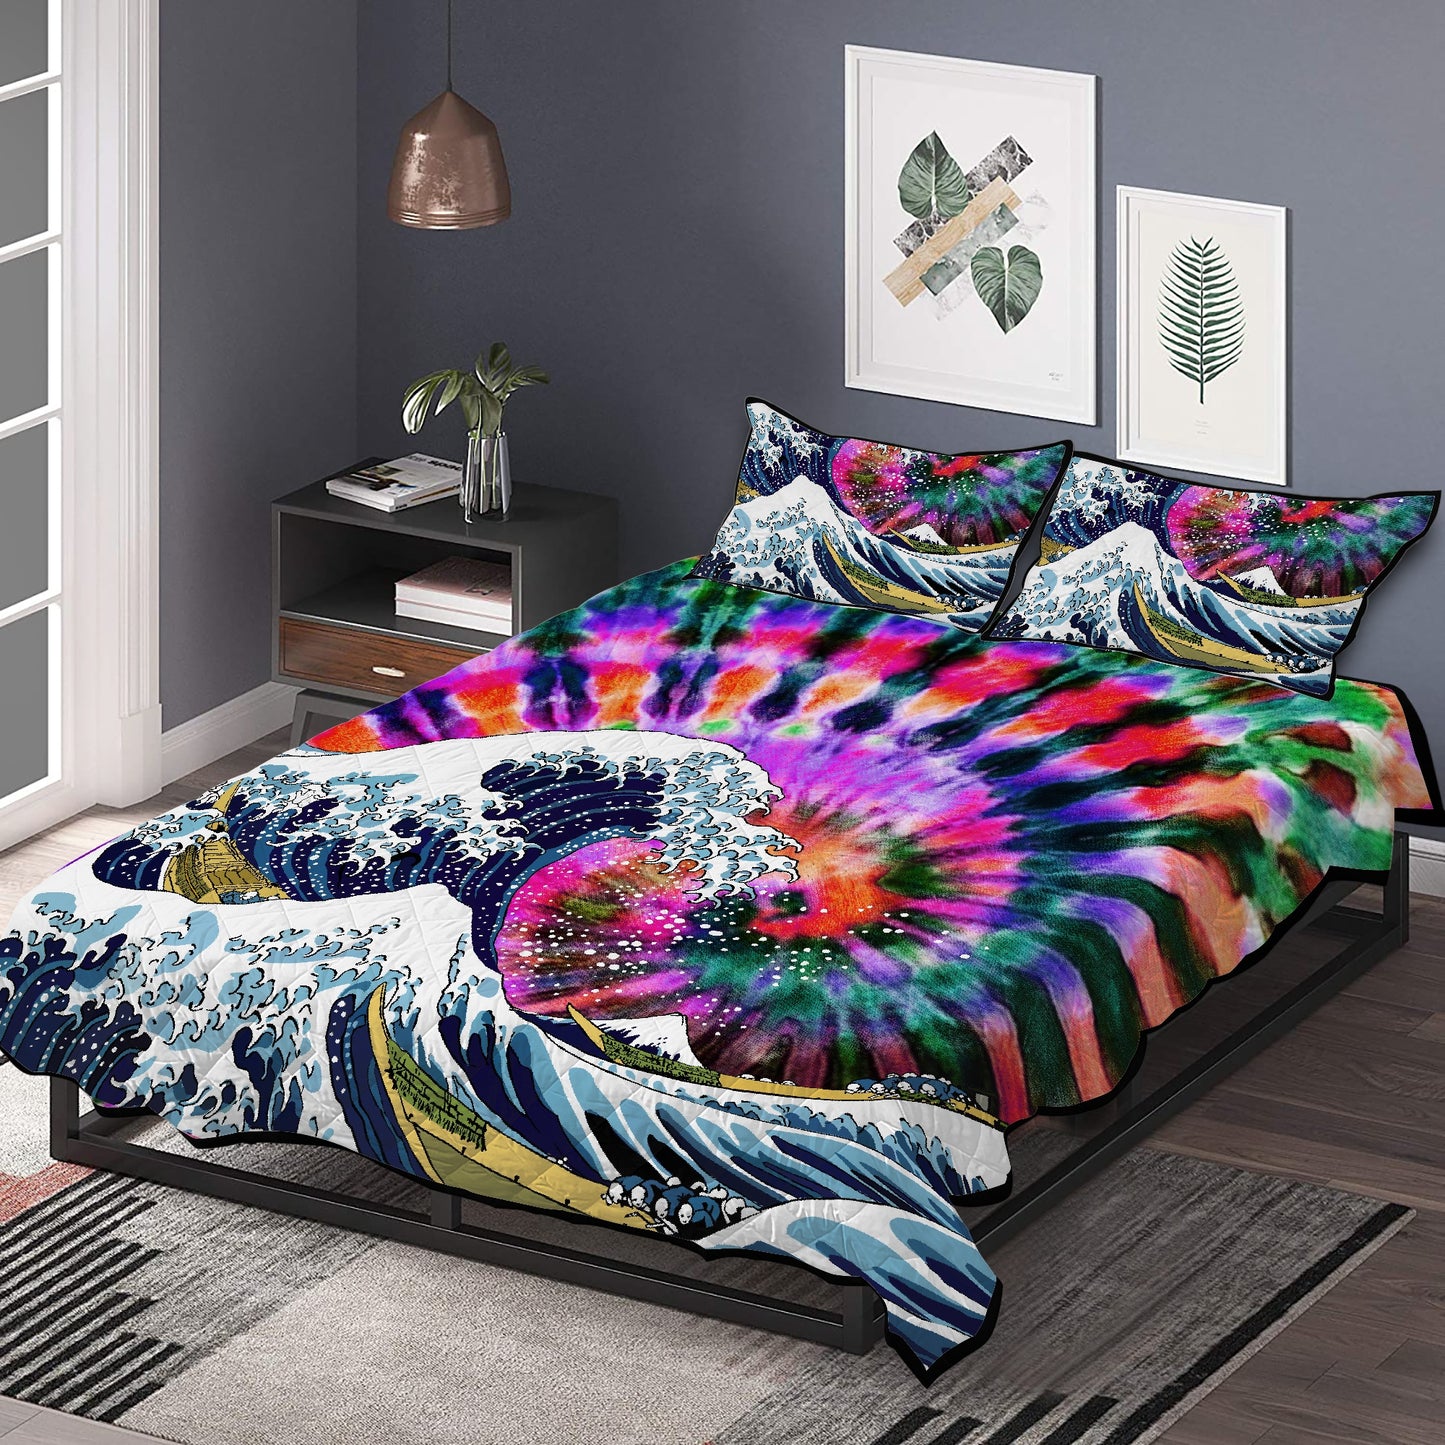 Taking the Waves to Bed with You While Sleeping with this Quilt Bed Set